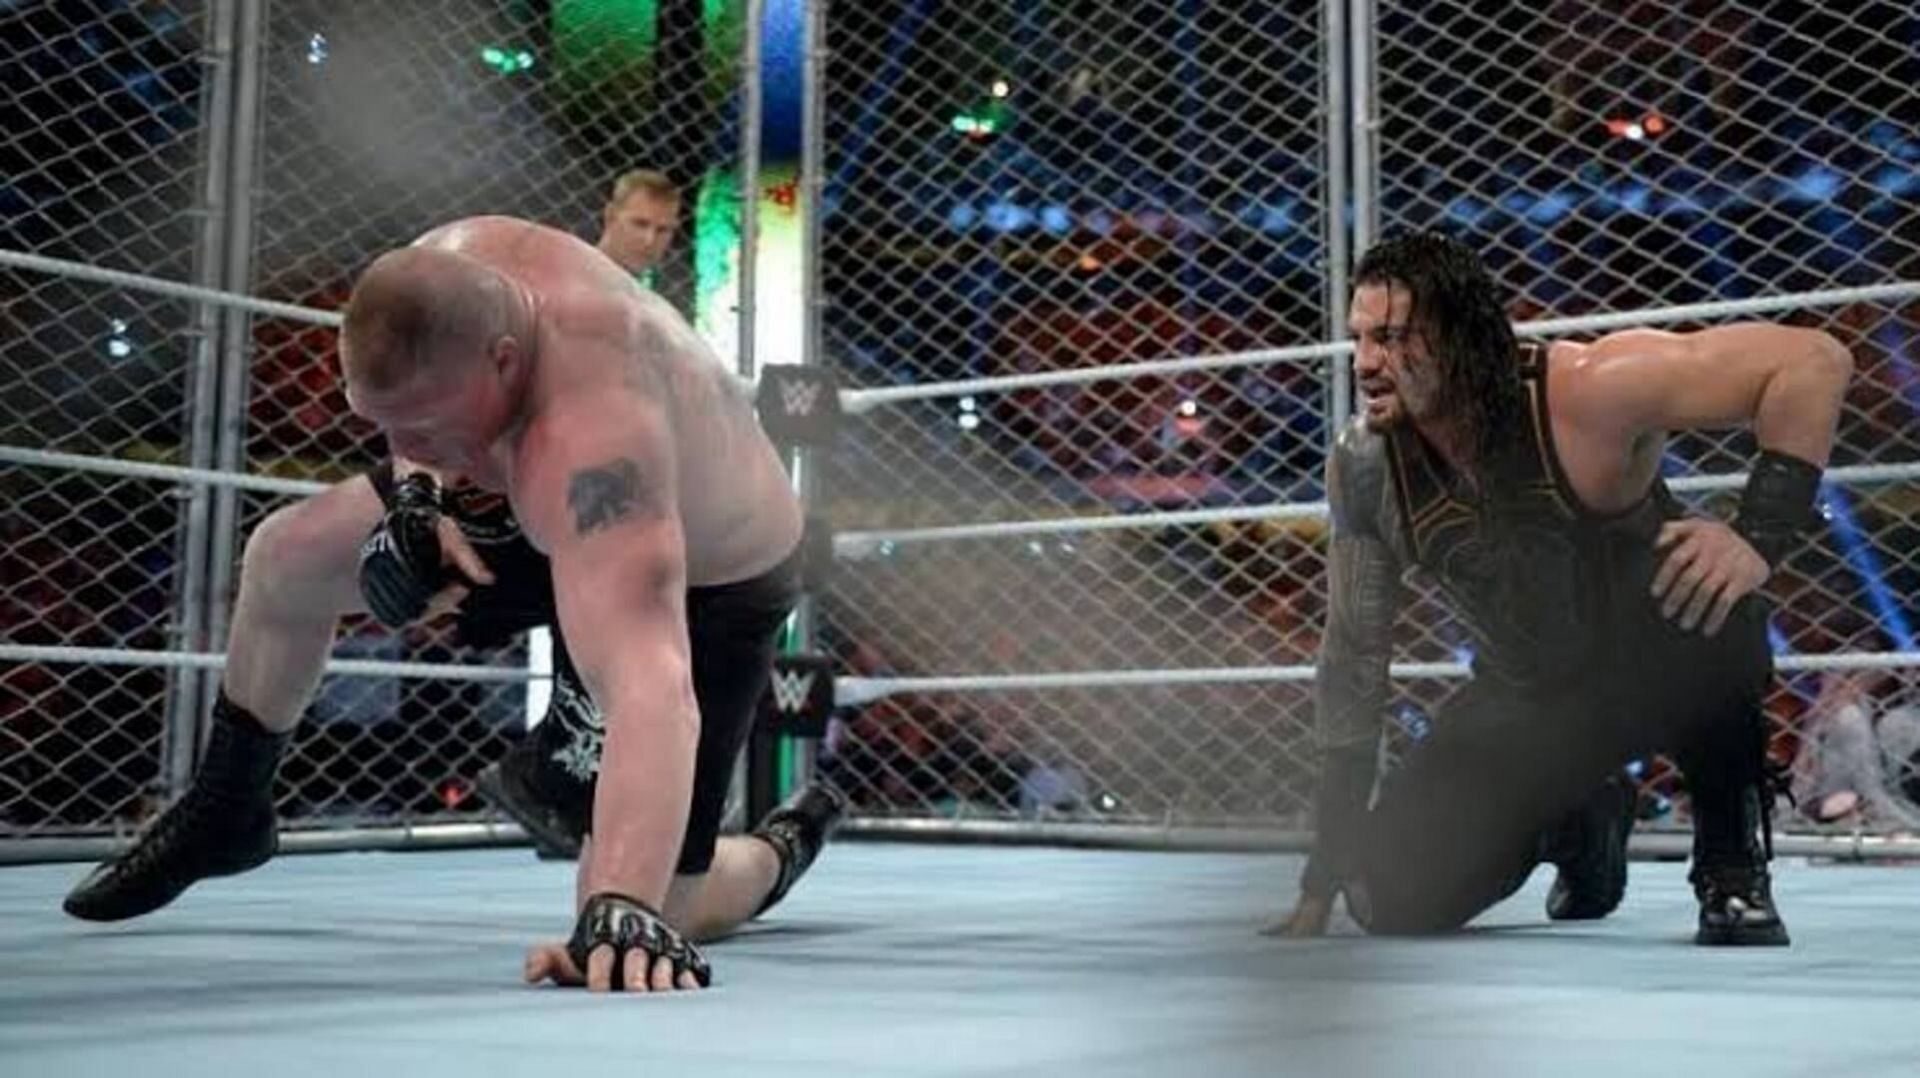 Roman Reigns and Brock Lesnar at Greatest Royal Rumble.